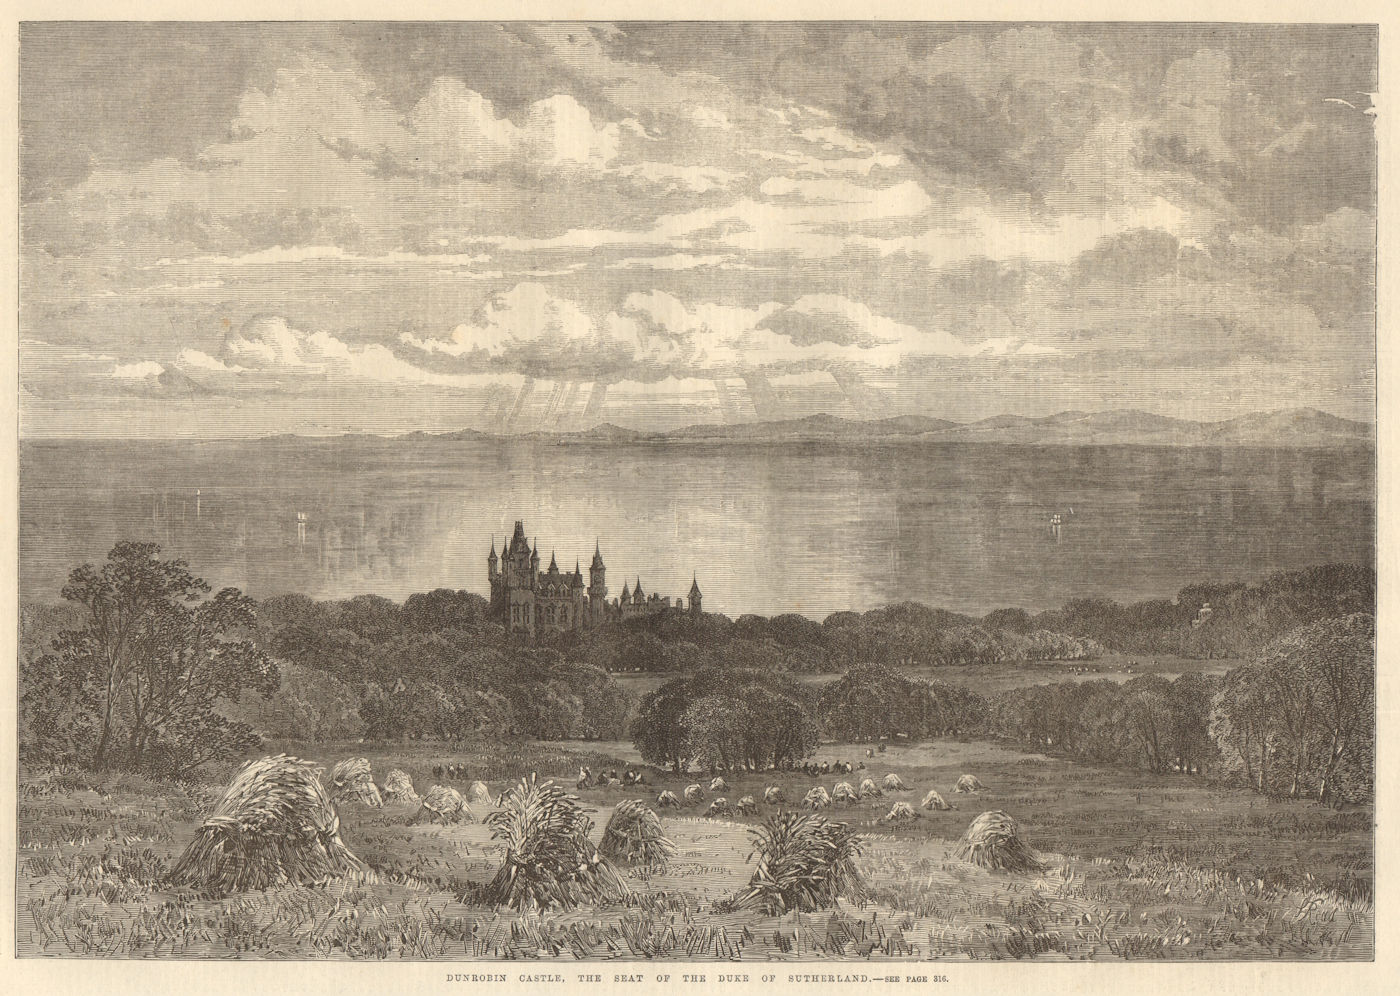 Dunrobin Castle, the seat of the Duke of Sutherland. Scotland 1866 old print